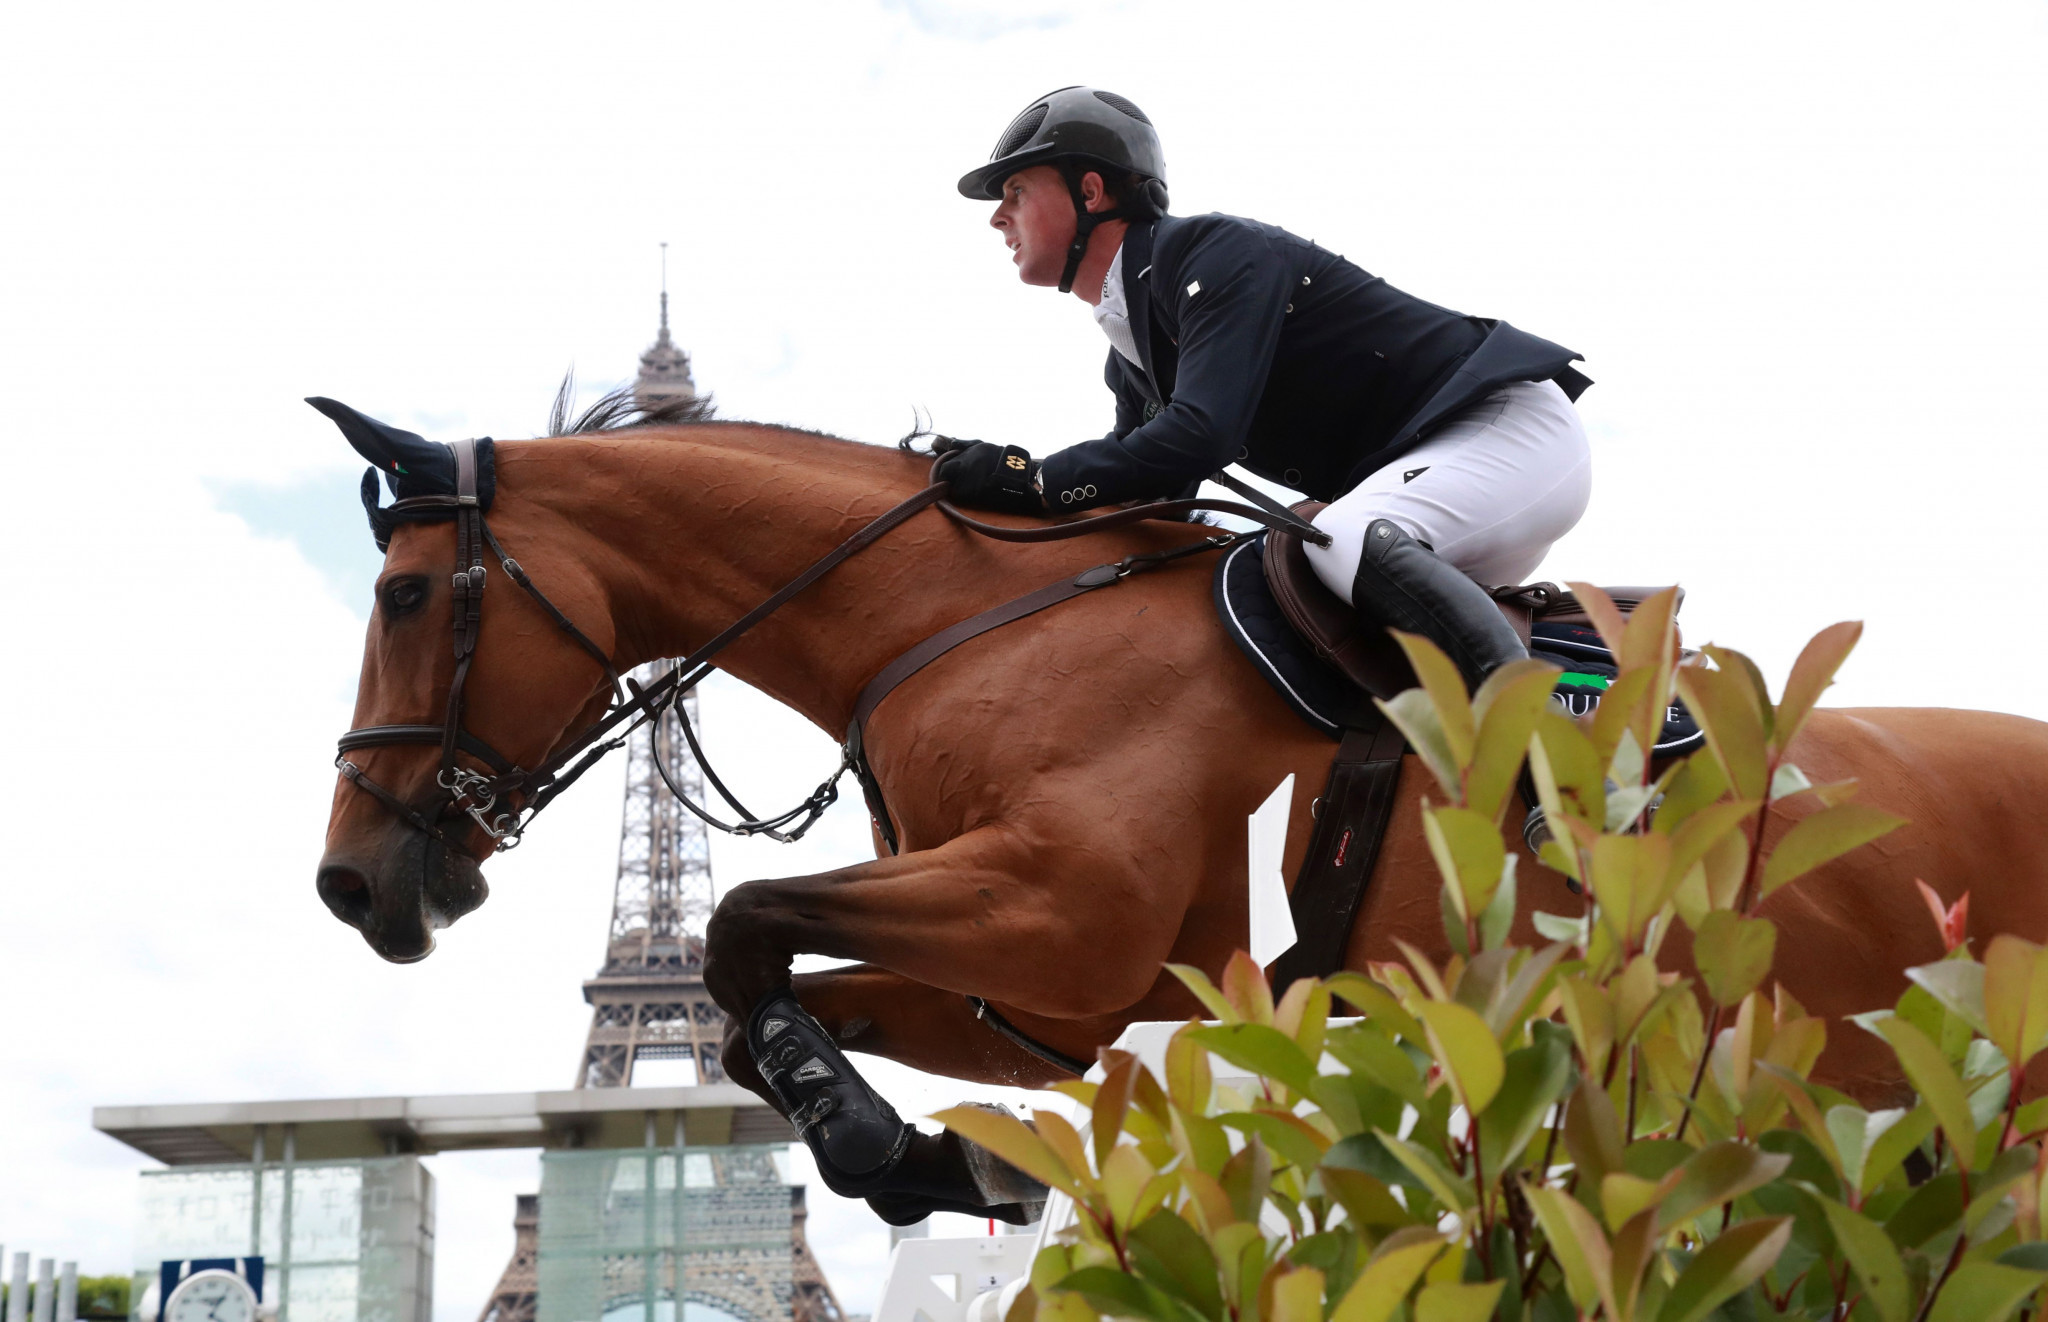 Ben Maher could top the overall standings in Rome ©Getty Images